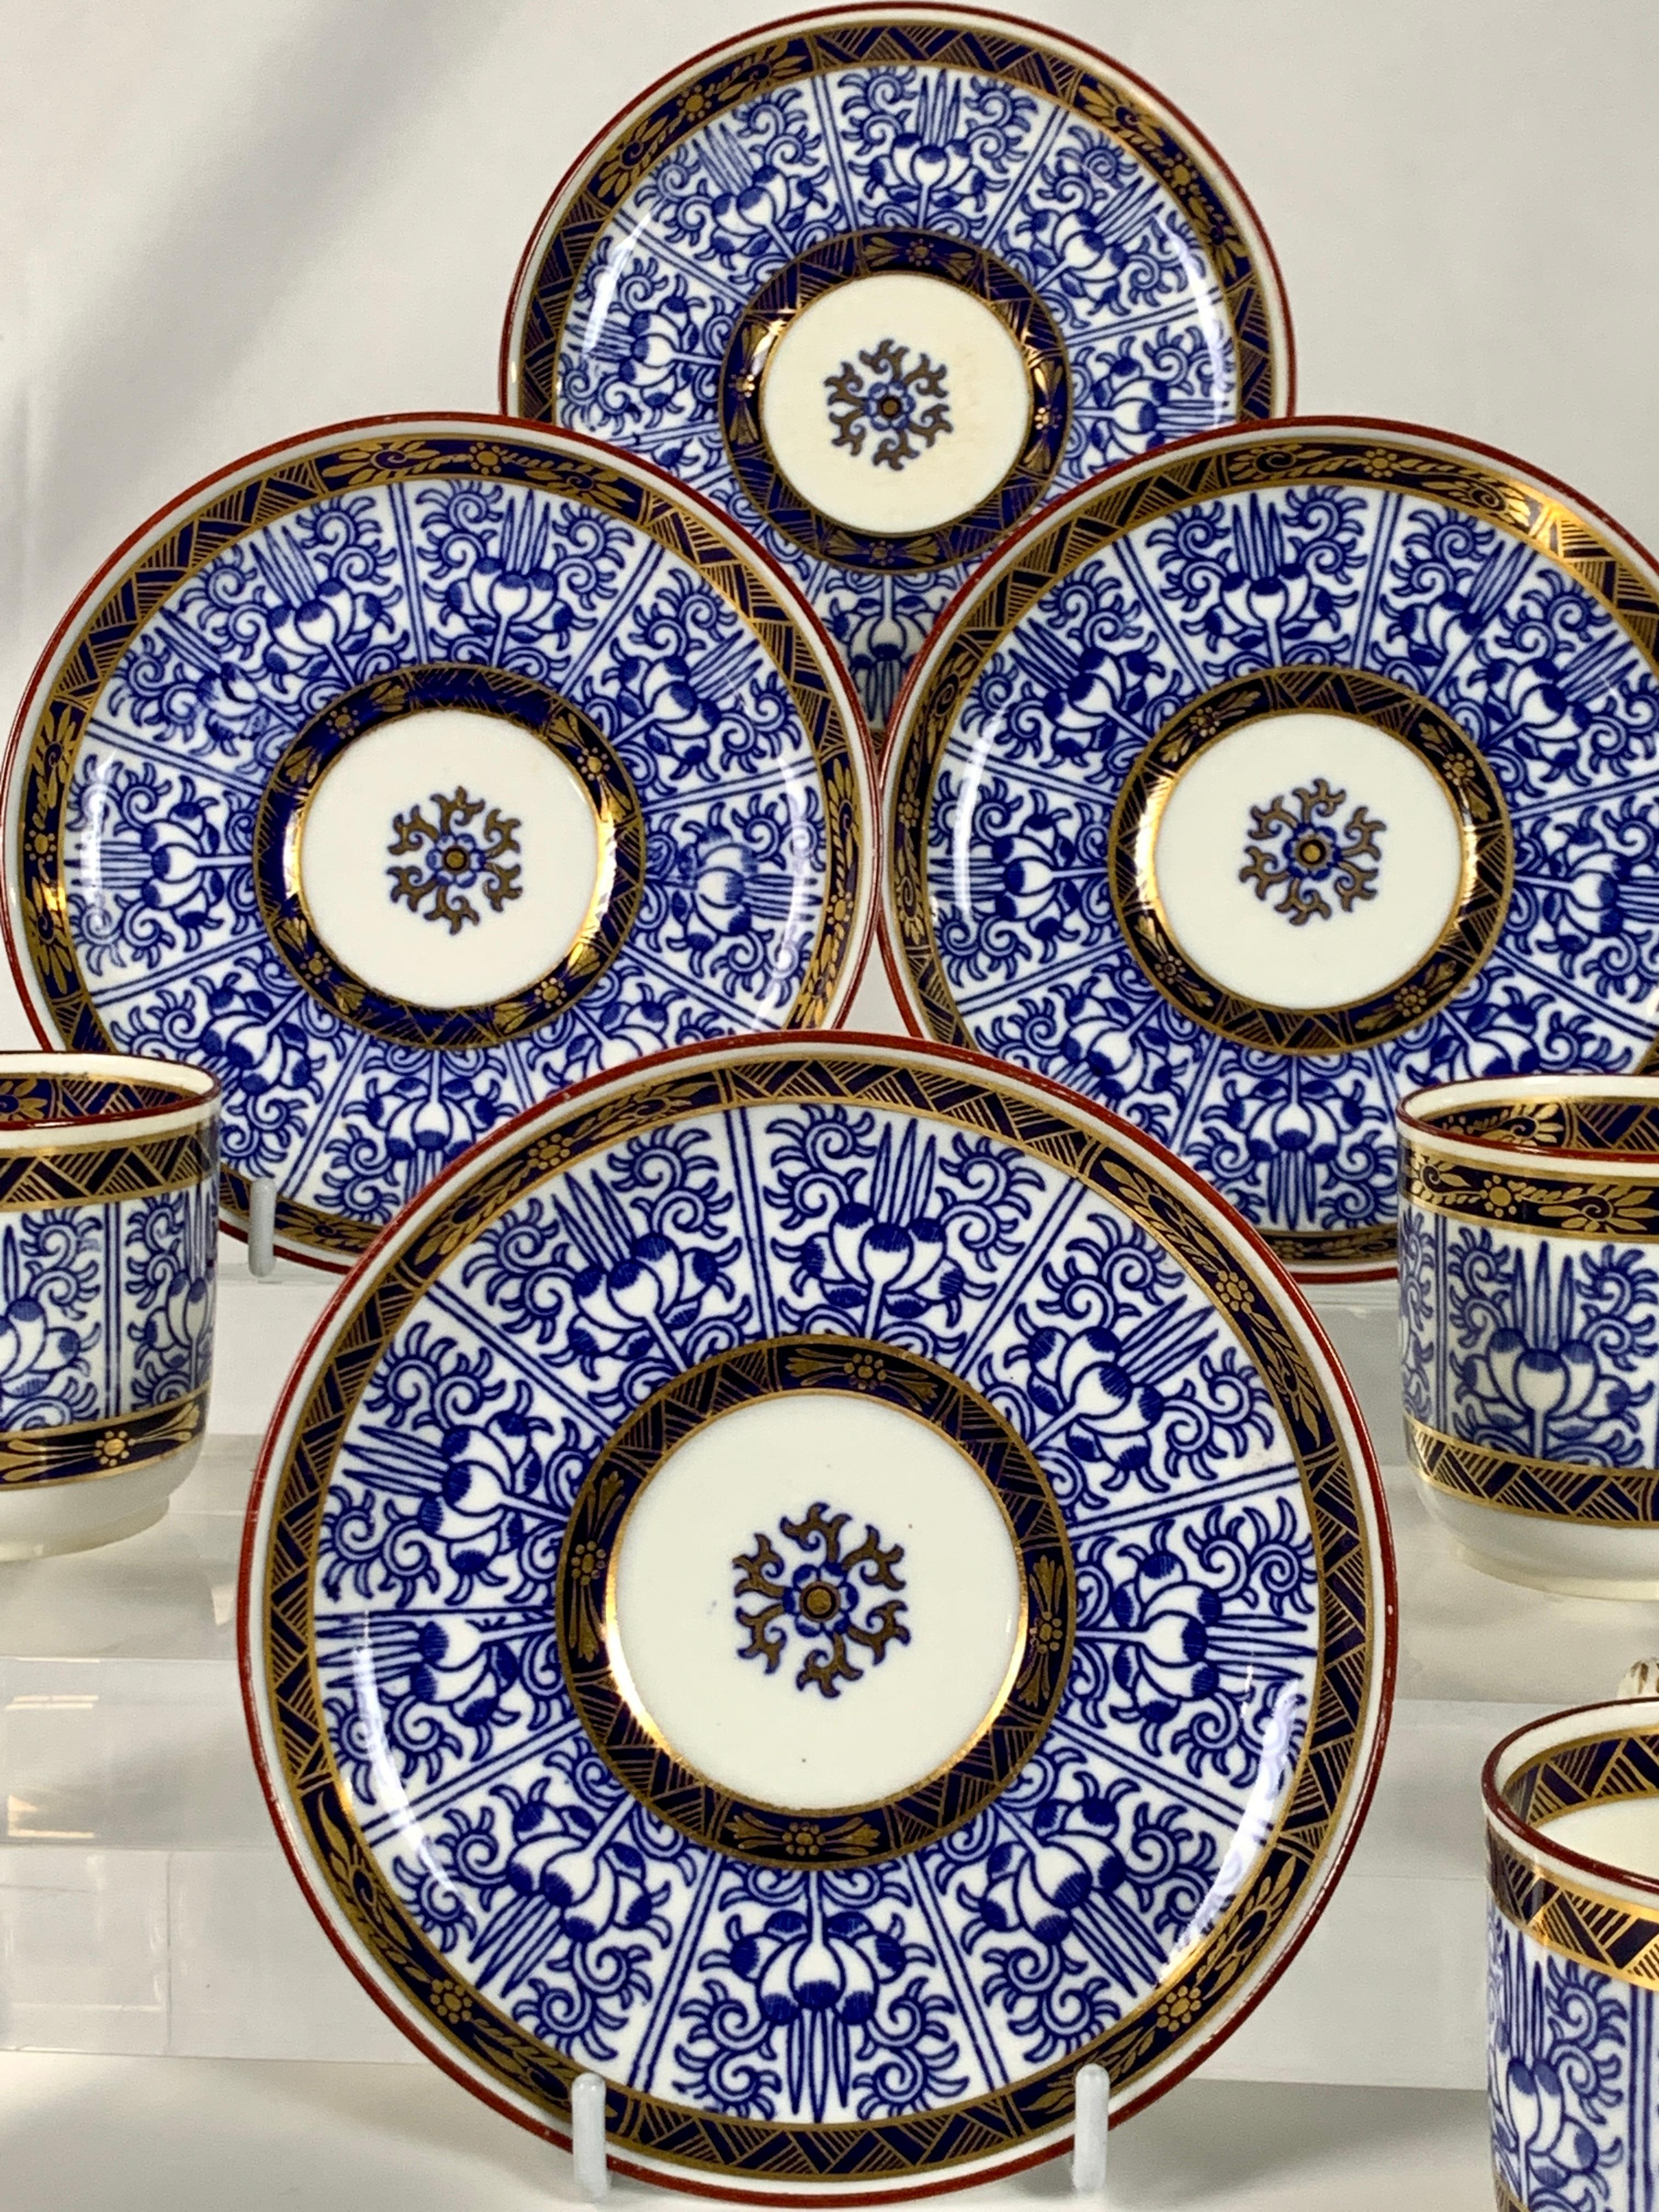 Regency Demitasse Blue and White Porcelain Cups and Saucers in the Royal Lily Pattern